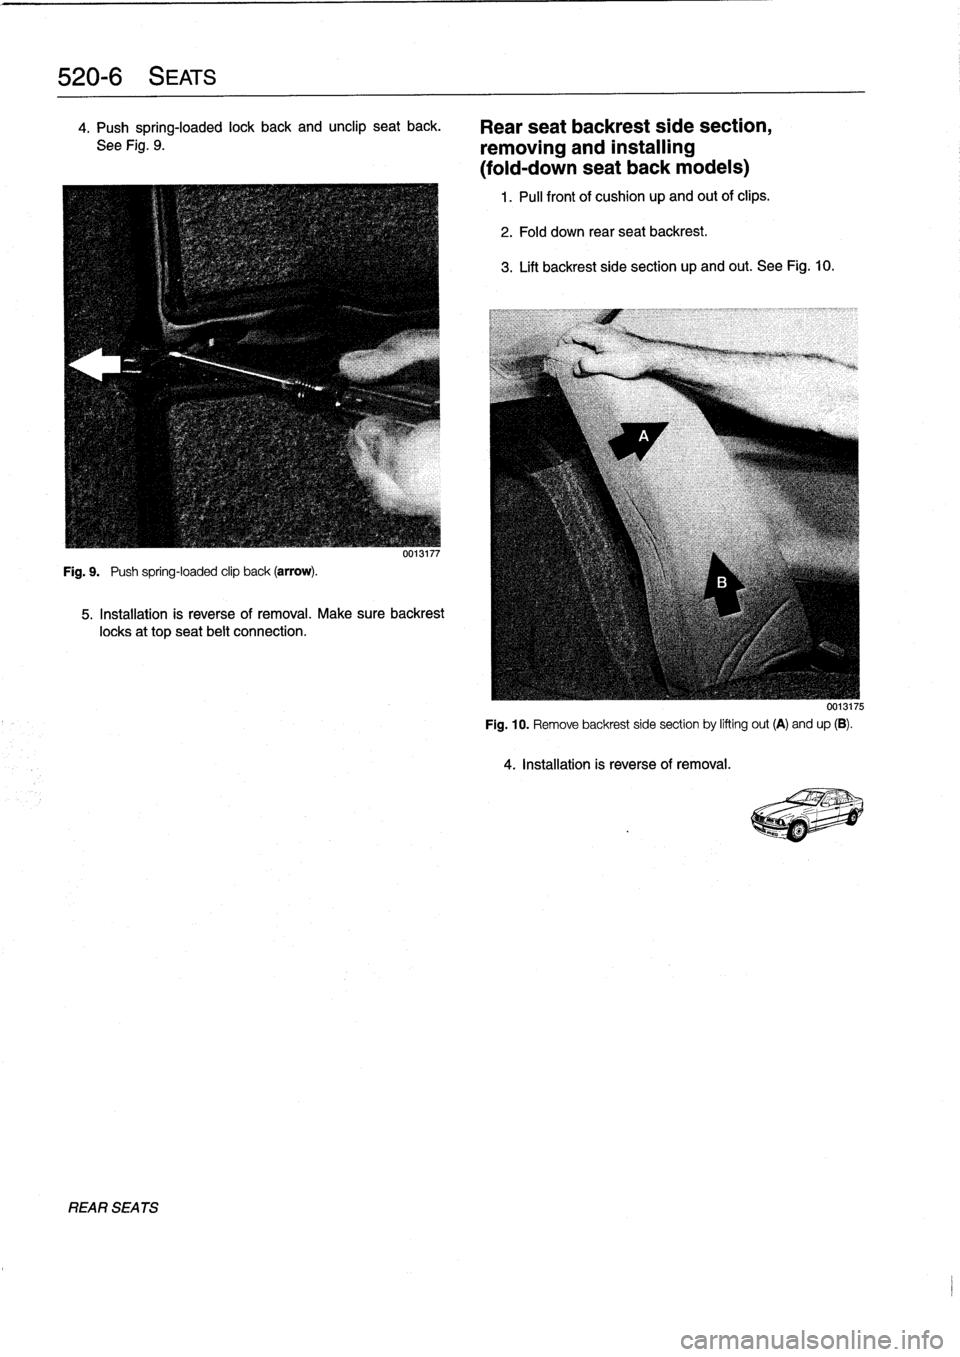 BMW 318i 1997 E36 Workshop Manual 
520-
6
SEATS

4
.
Push
spring-loaded
lock
back
and
unclip
seat
back
.

See
Fig
.
9
.

Fig
.
9
.

	

Push
spring-loaded
clip
back
(arrow)
.

UU13117

5
.
Installation
is
reverse
of
removal
.
Make
sure